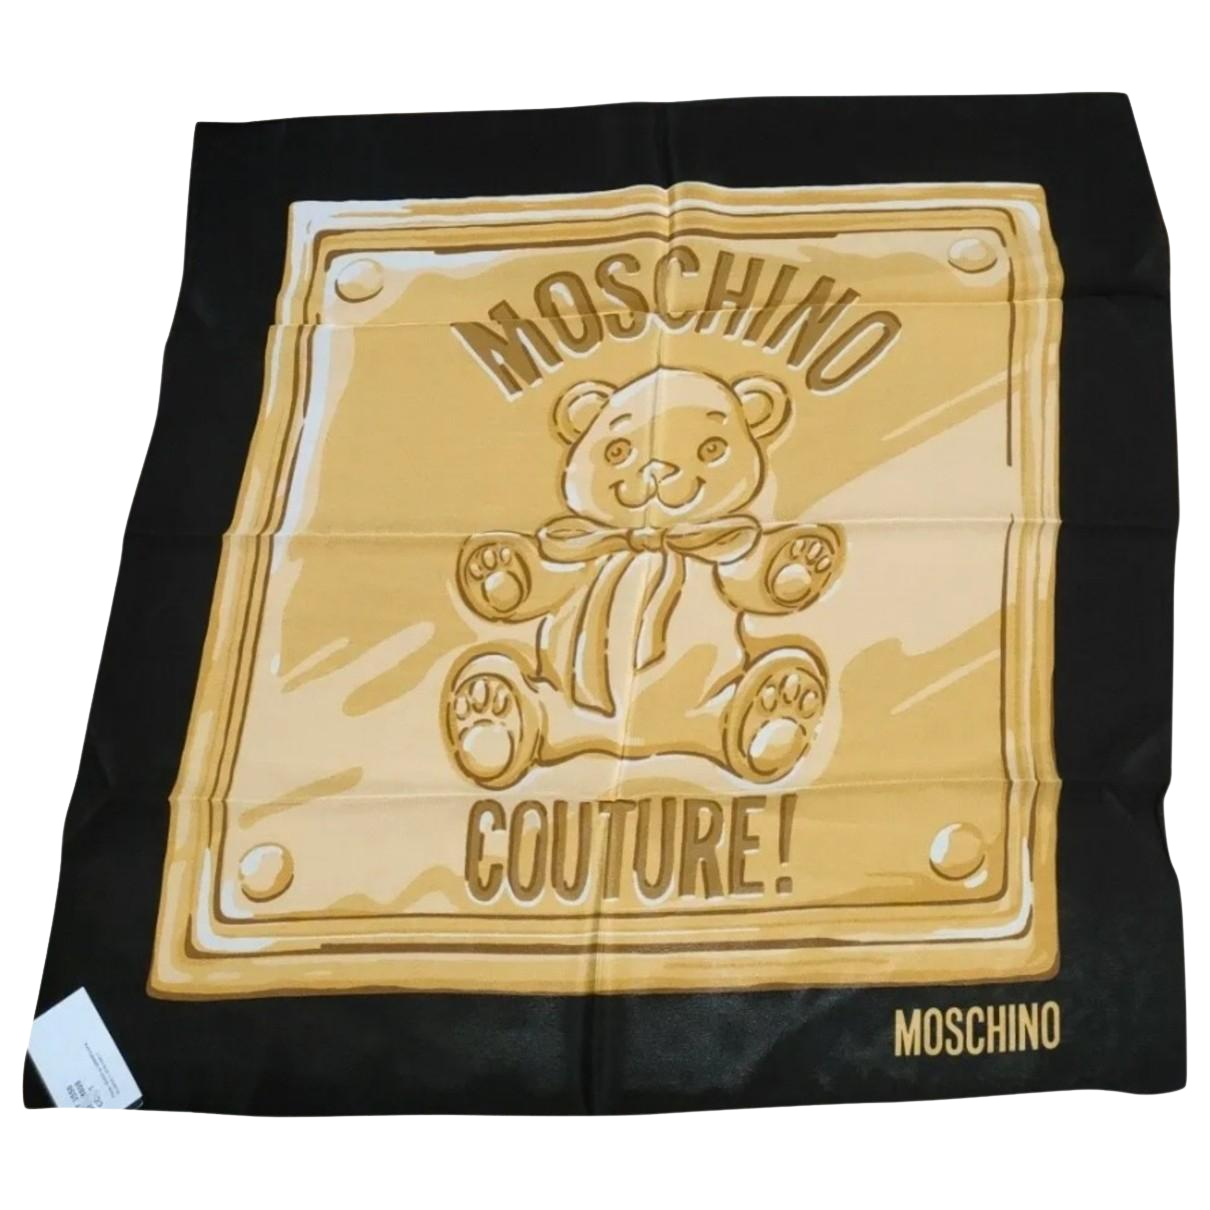 https://storage.googleapis.com/download/storage/v1/b/whering.appspot.com/o/marketplace_product_images%2Fmoschino-silk-neckerchief-gold-mB4TWAhEeWQfw7my7YEsyi.png?generation=1689051619992199&alt=media